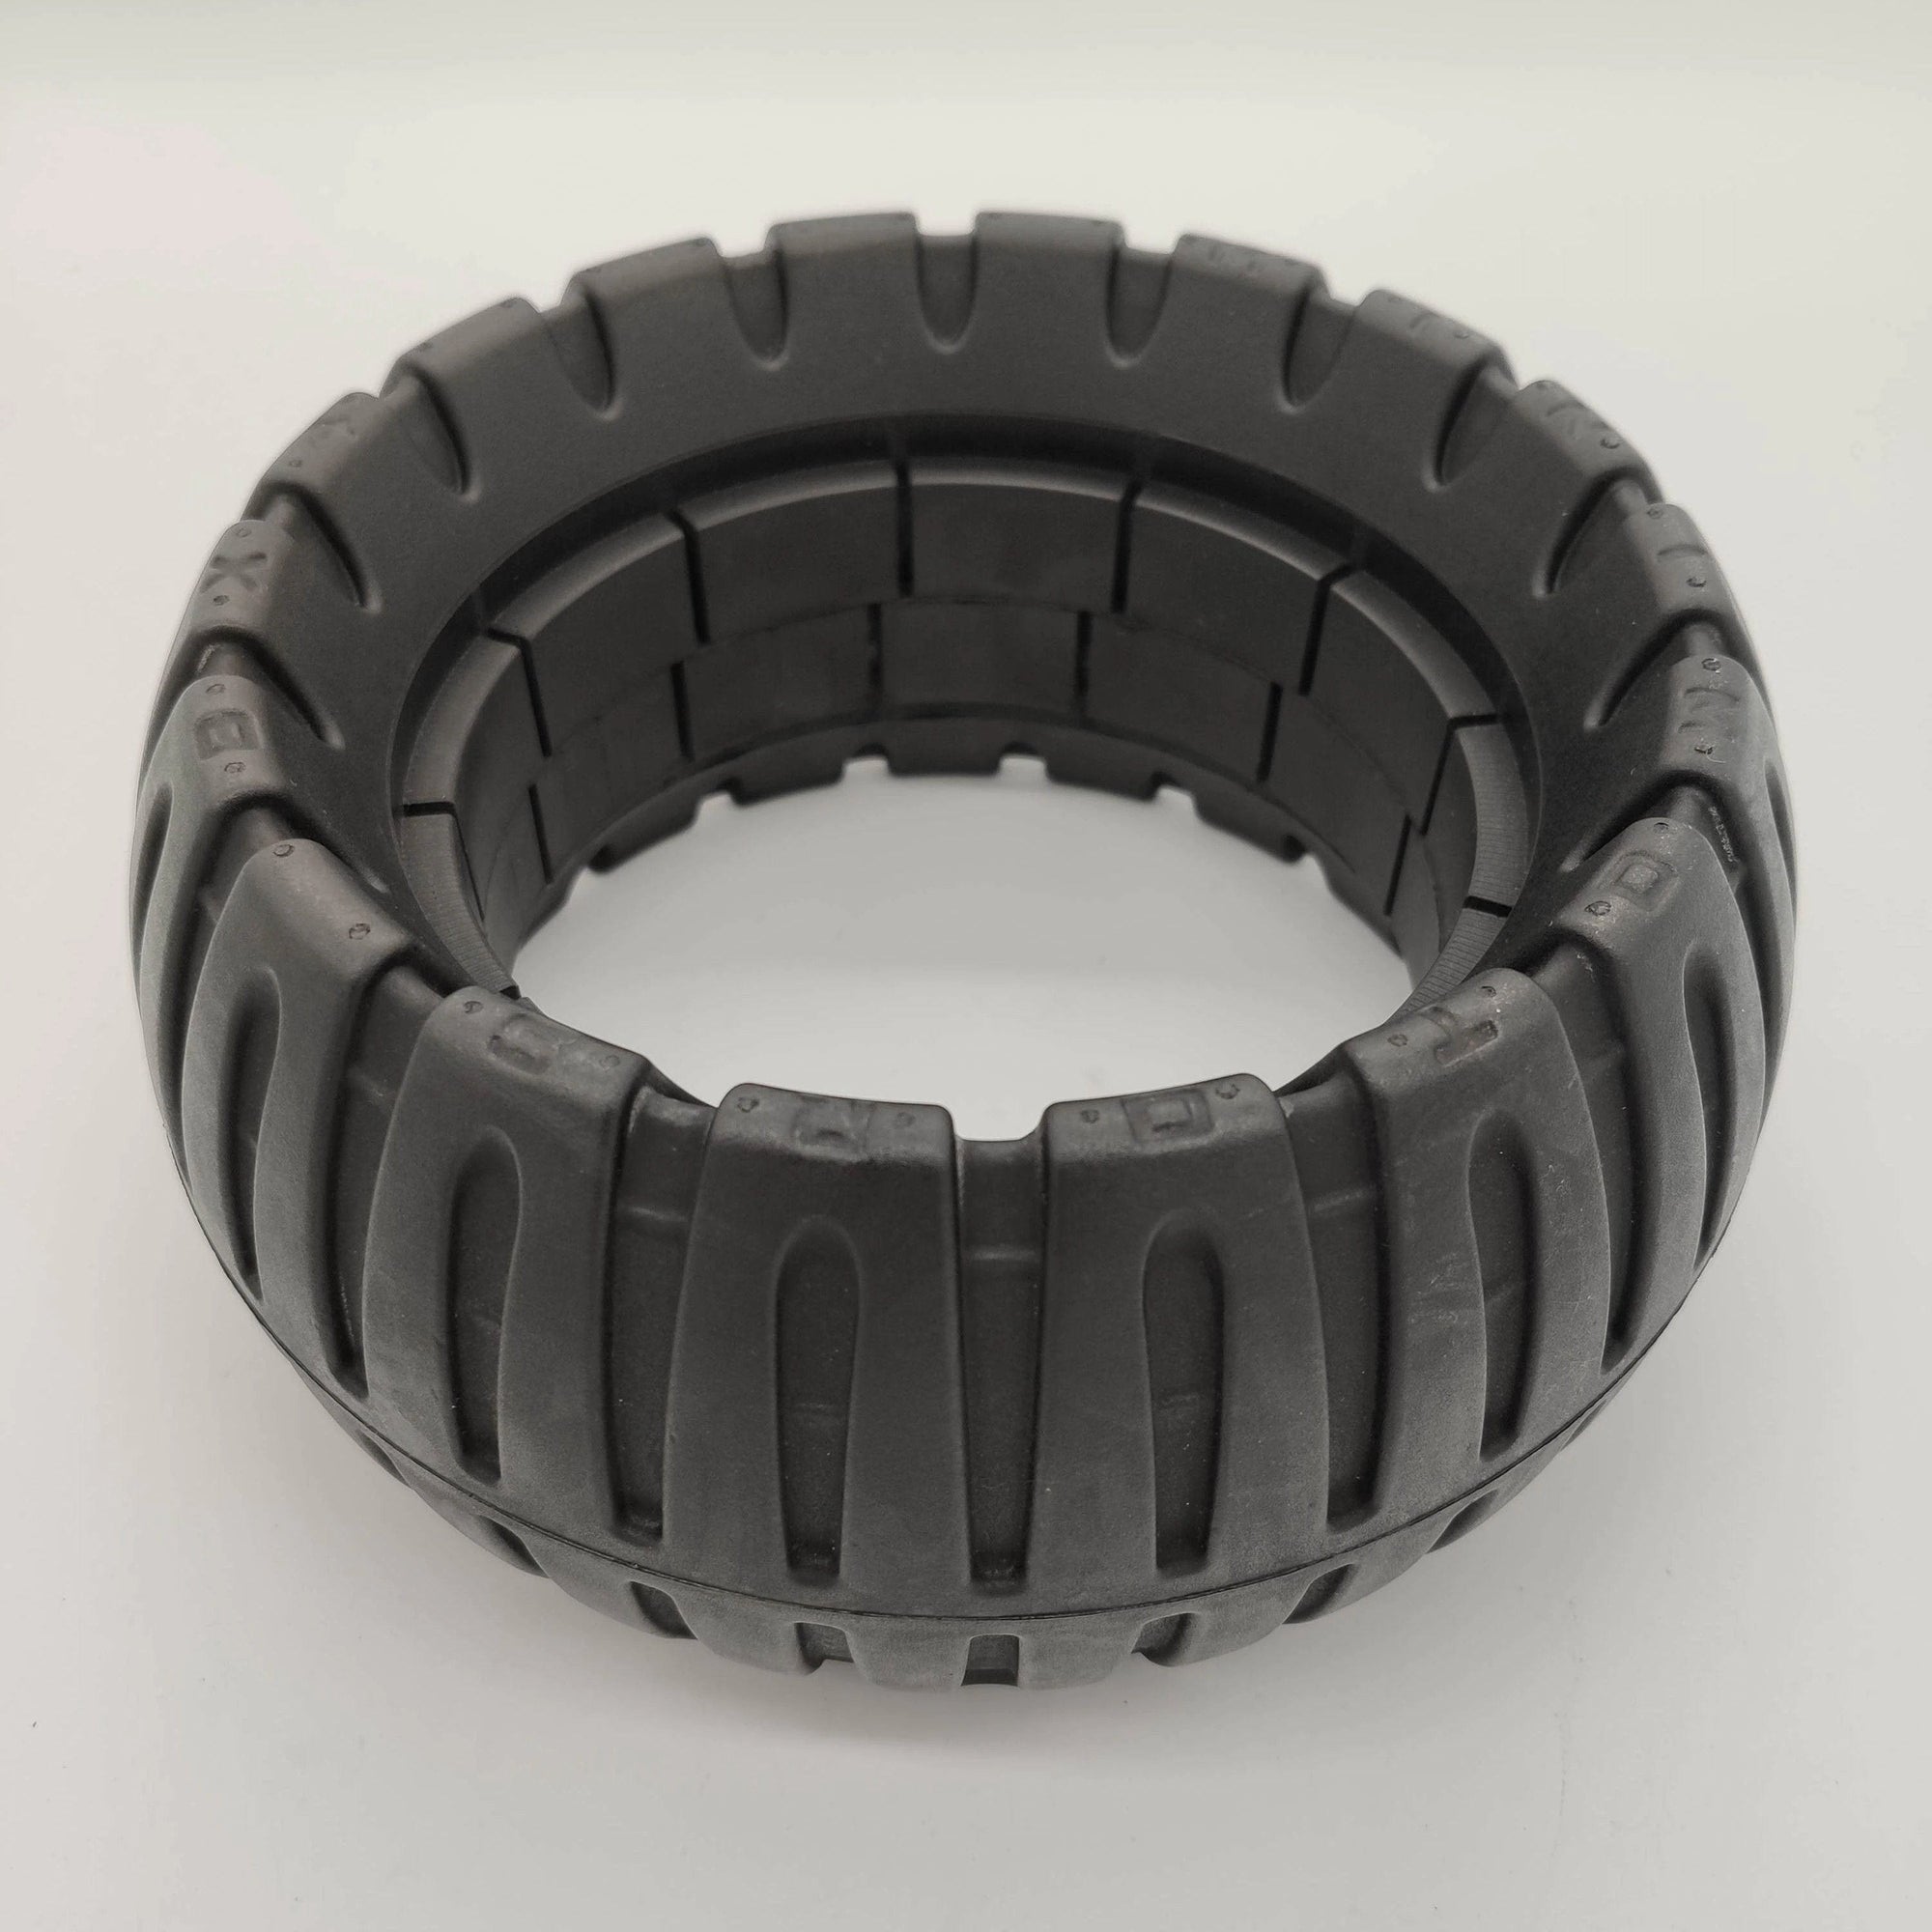 Photo of 8x4 Minimotors Solid Tire spare part